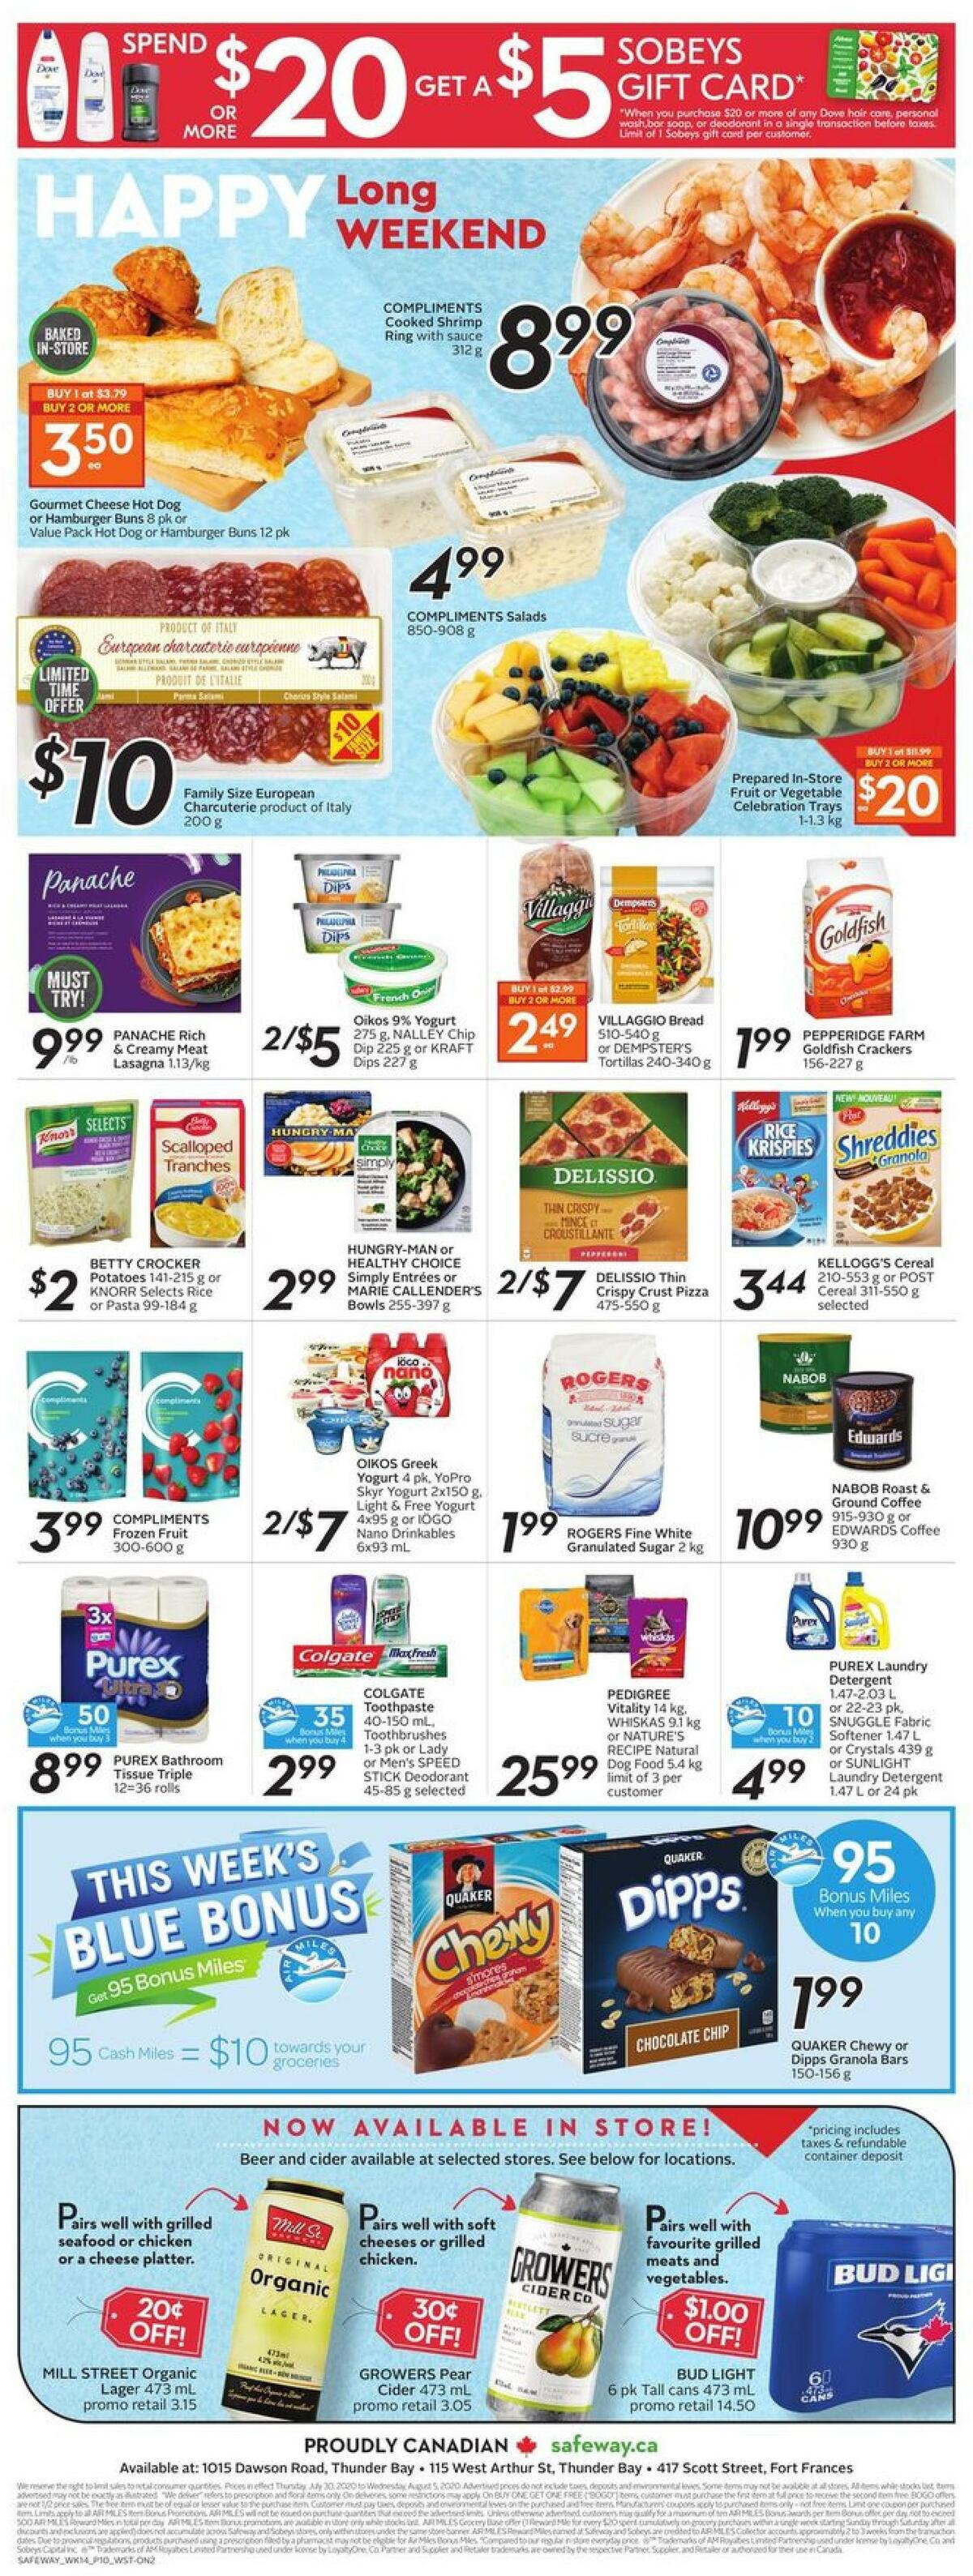 Safeway Flyer from July 30